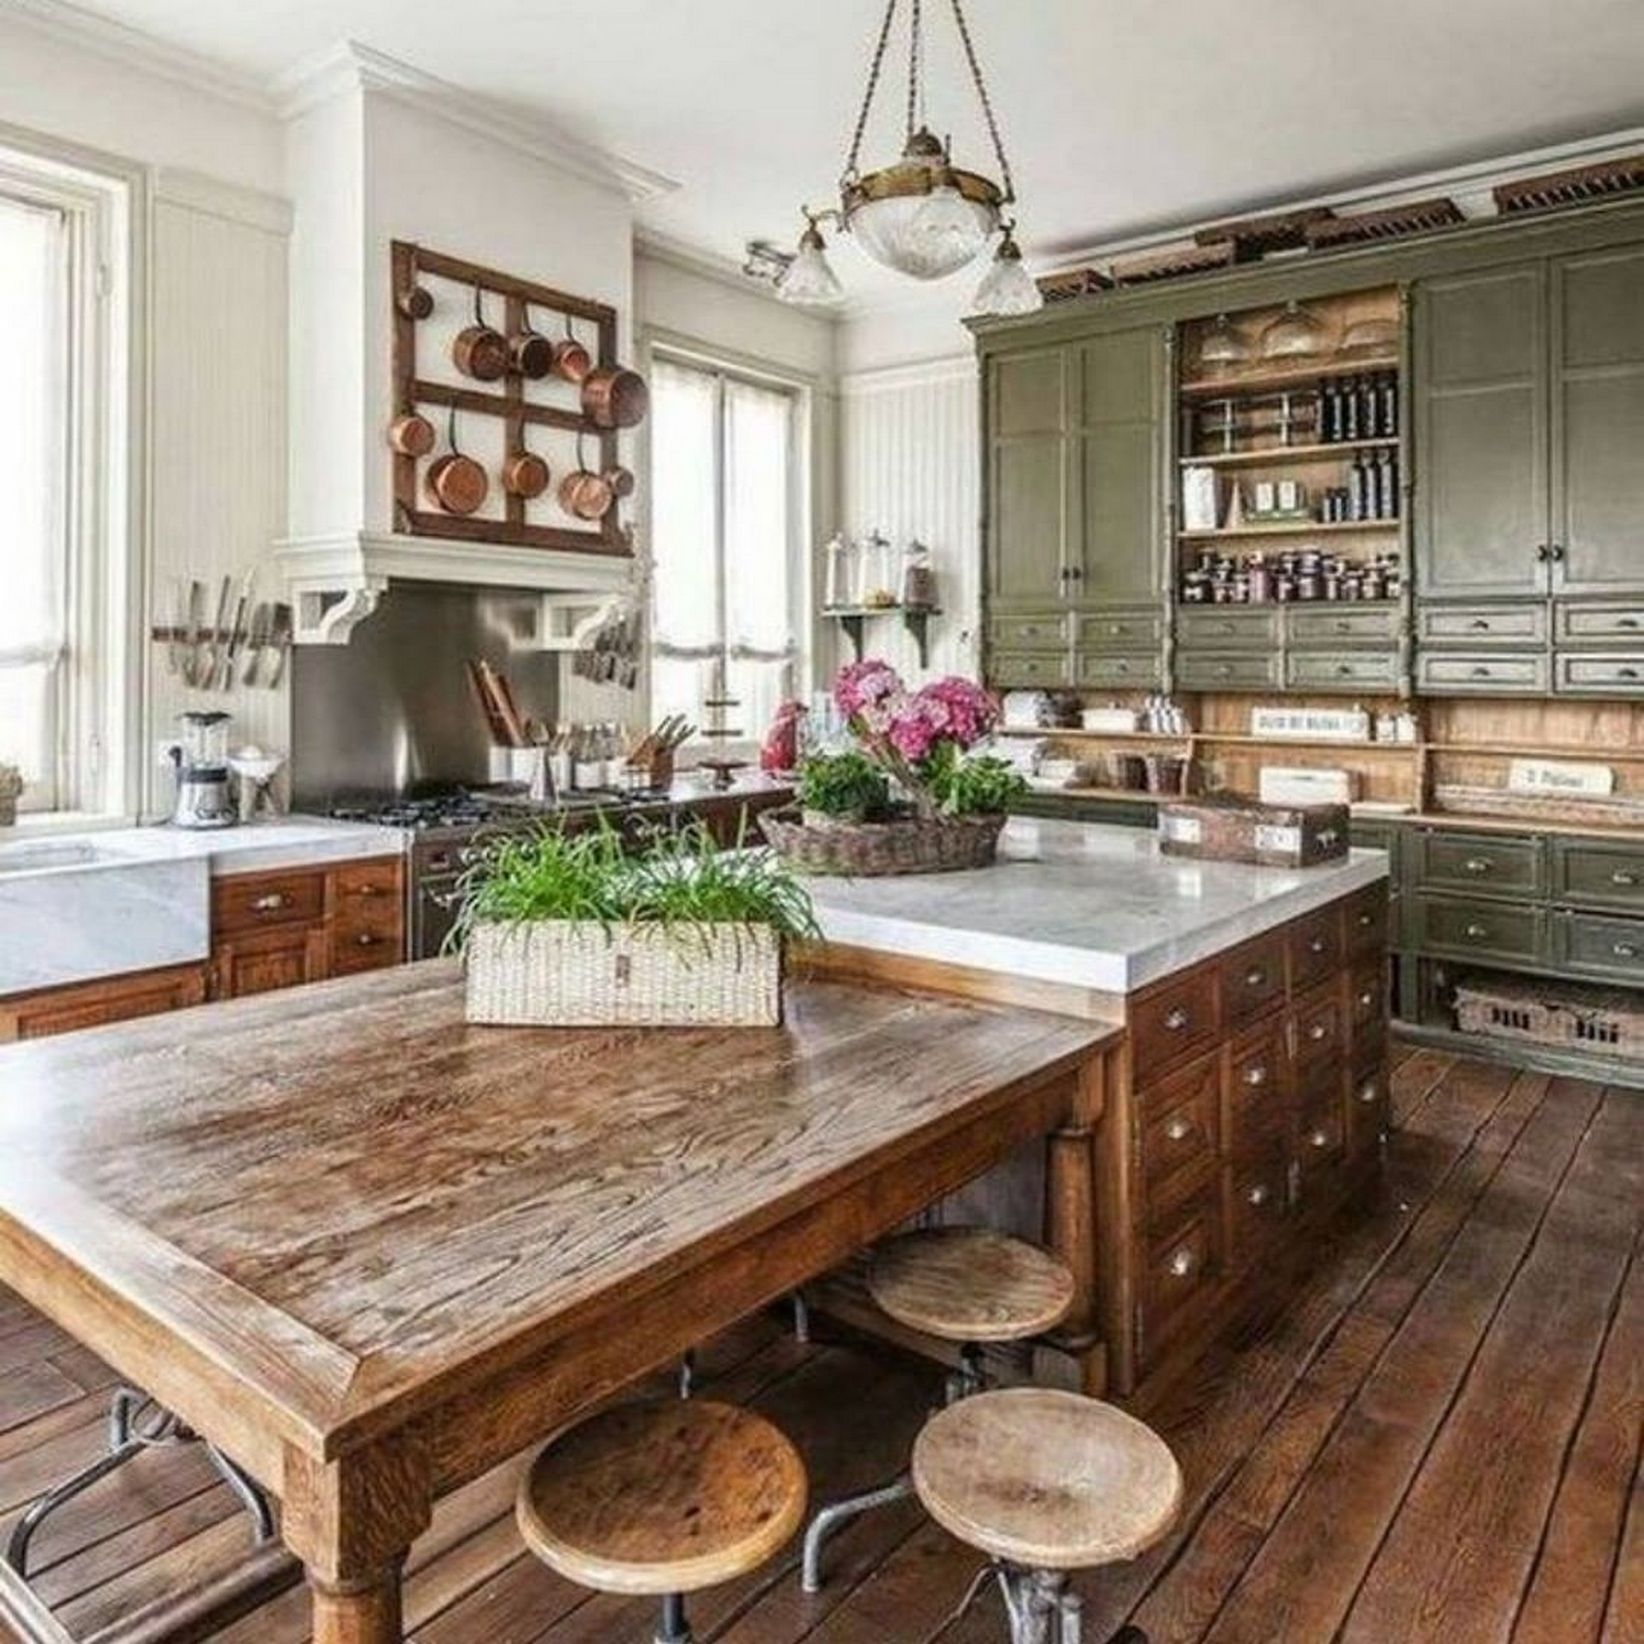 What No One Tells You About Rustic Home Decor Ideas